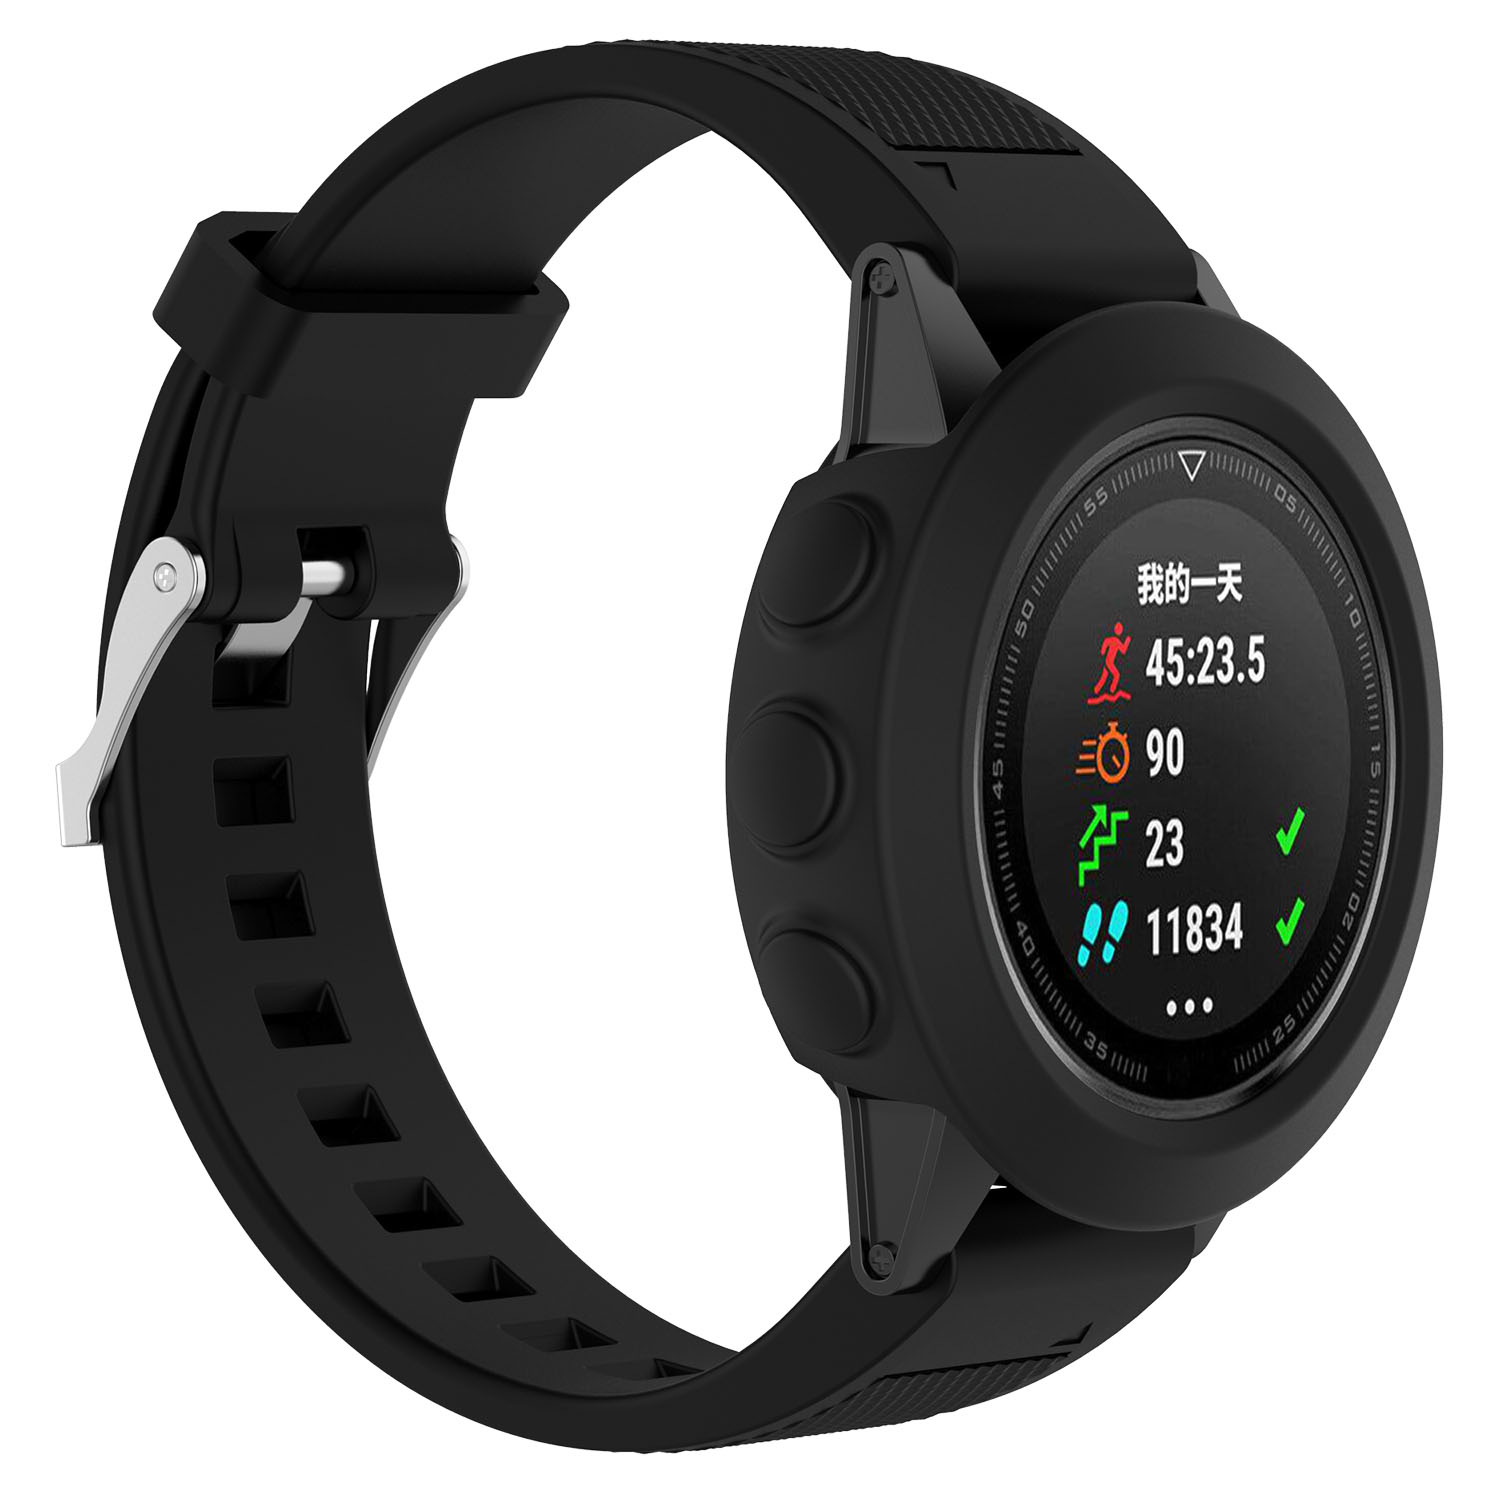 Find Bakeey Anti Scratch Shockproof Soft Silicone Watch Case Cover for Garmin Fenix 5S / Fenix 5 / Fenix 5X for Sale on Gipsybee.com with cryptocurrencies